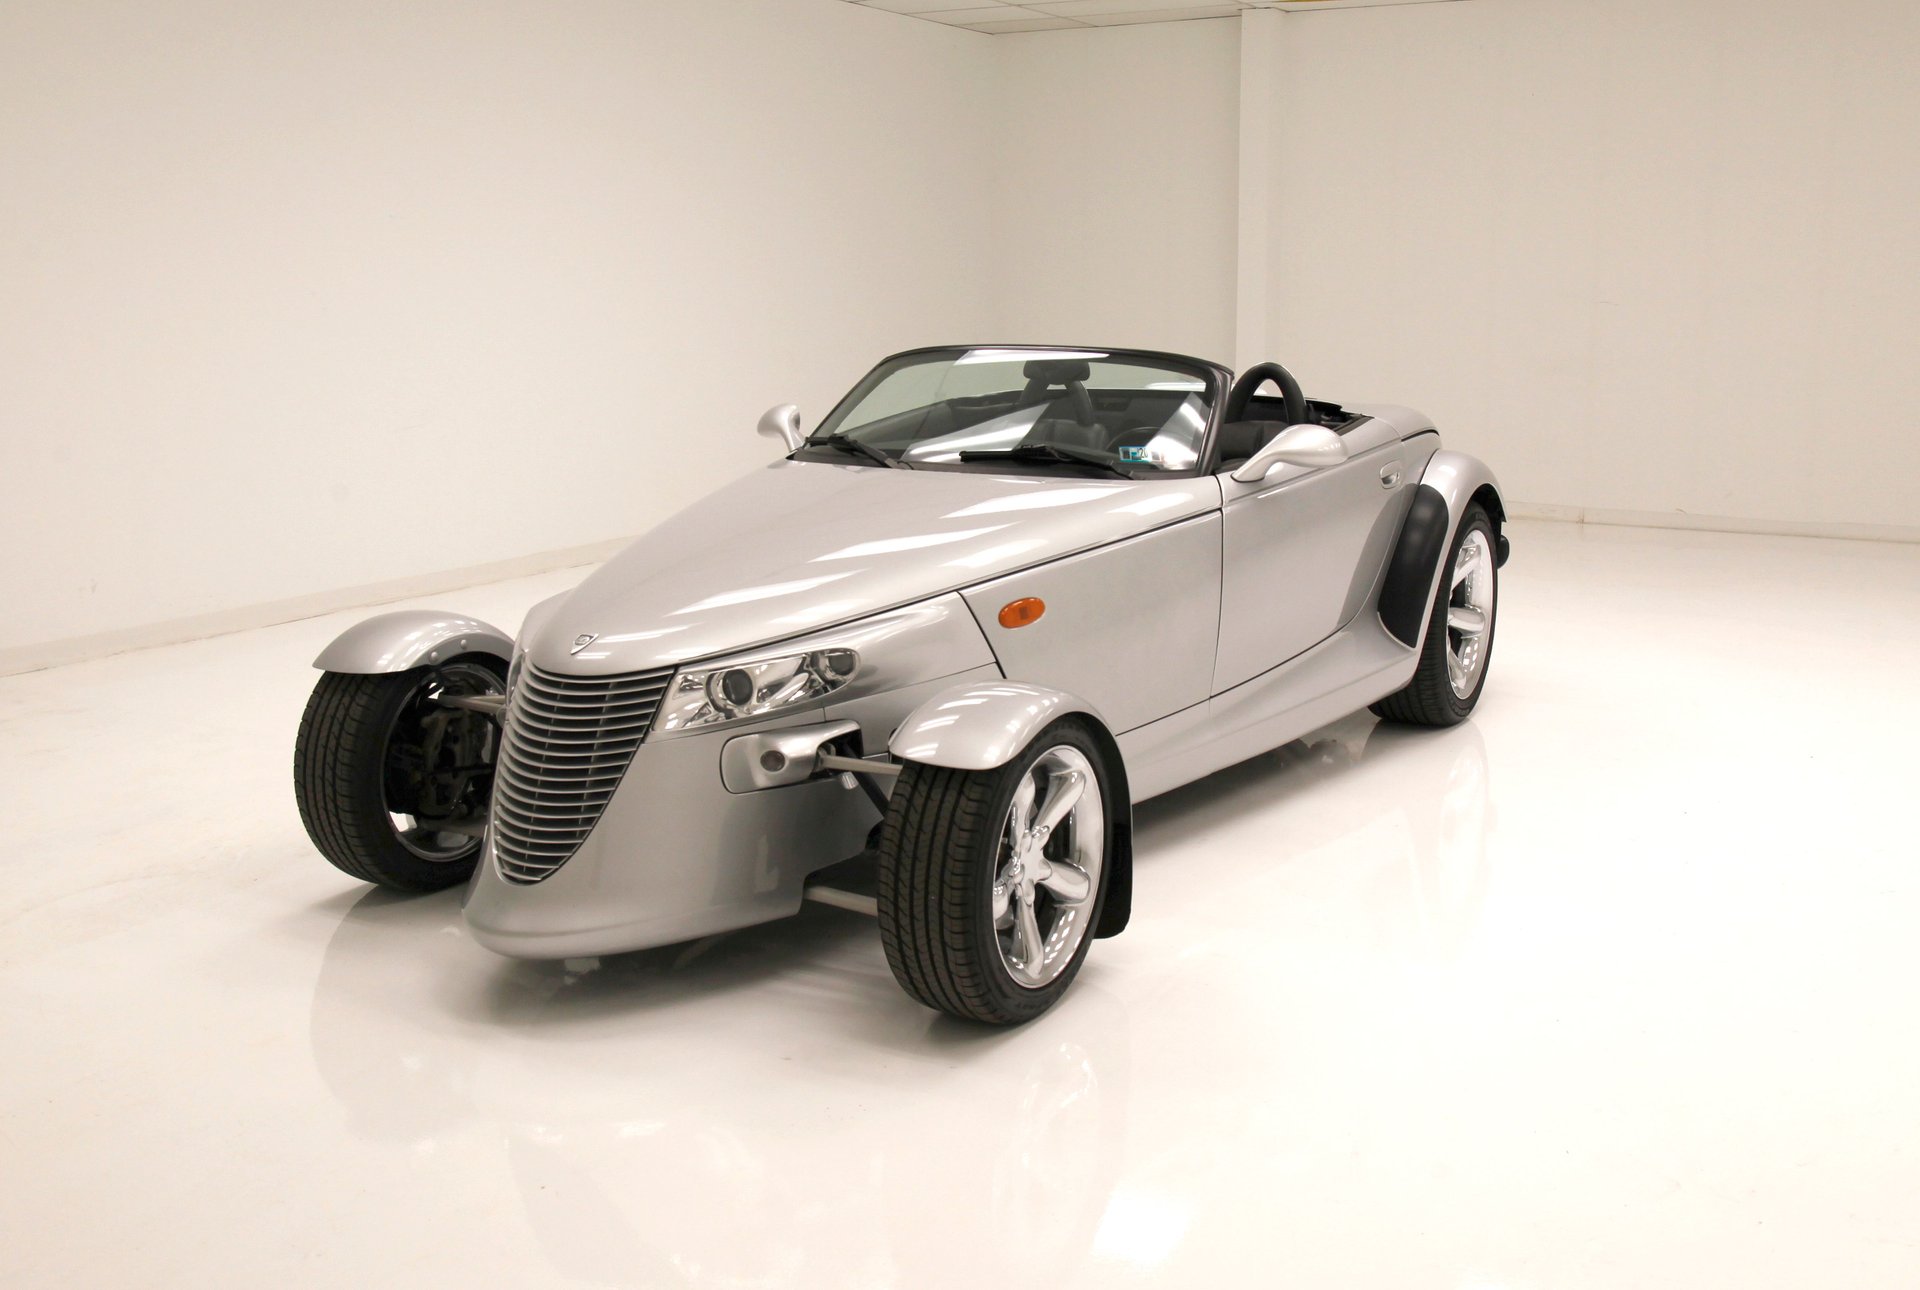 2000 Plymouth Prowler | Classic Auto Mall